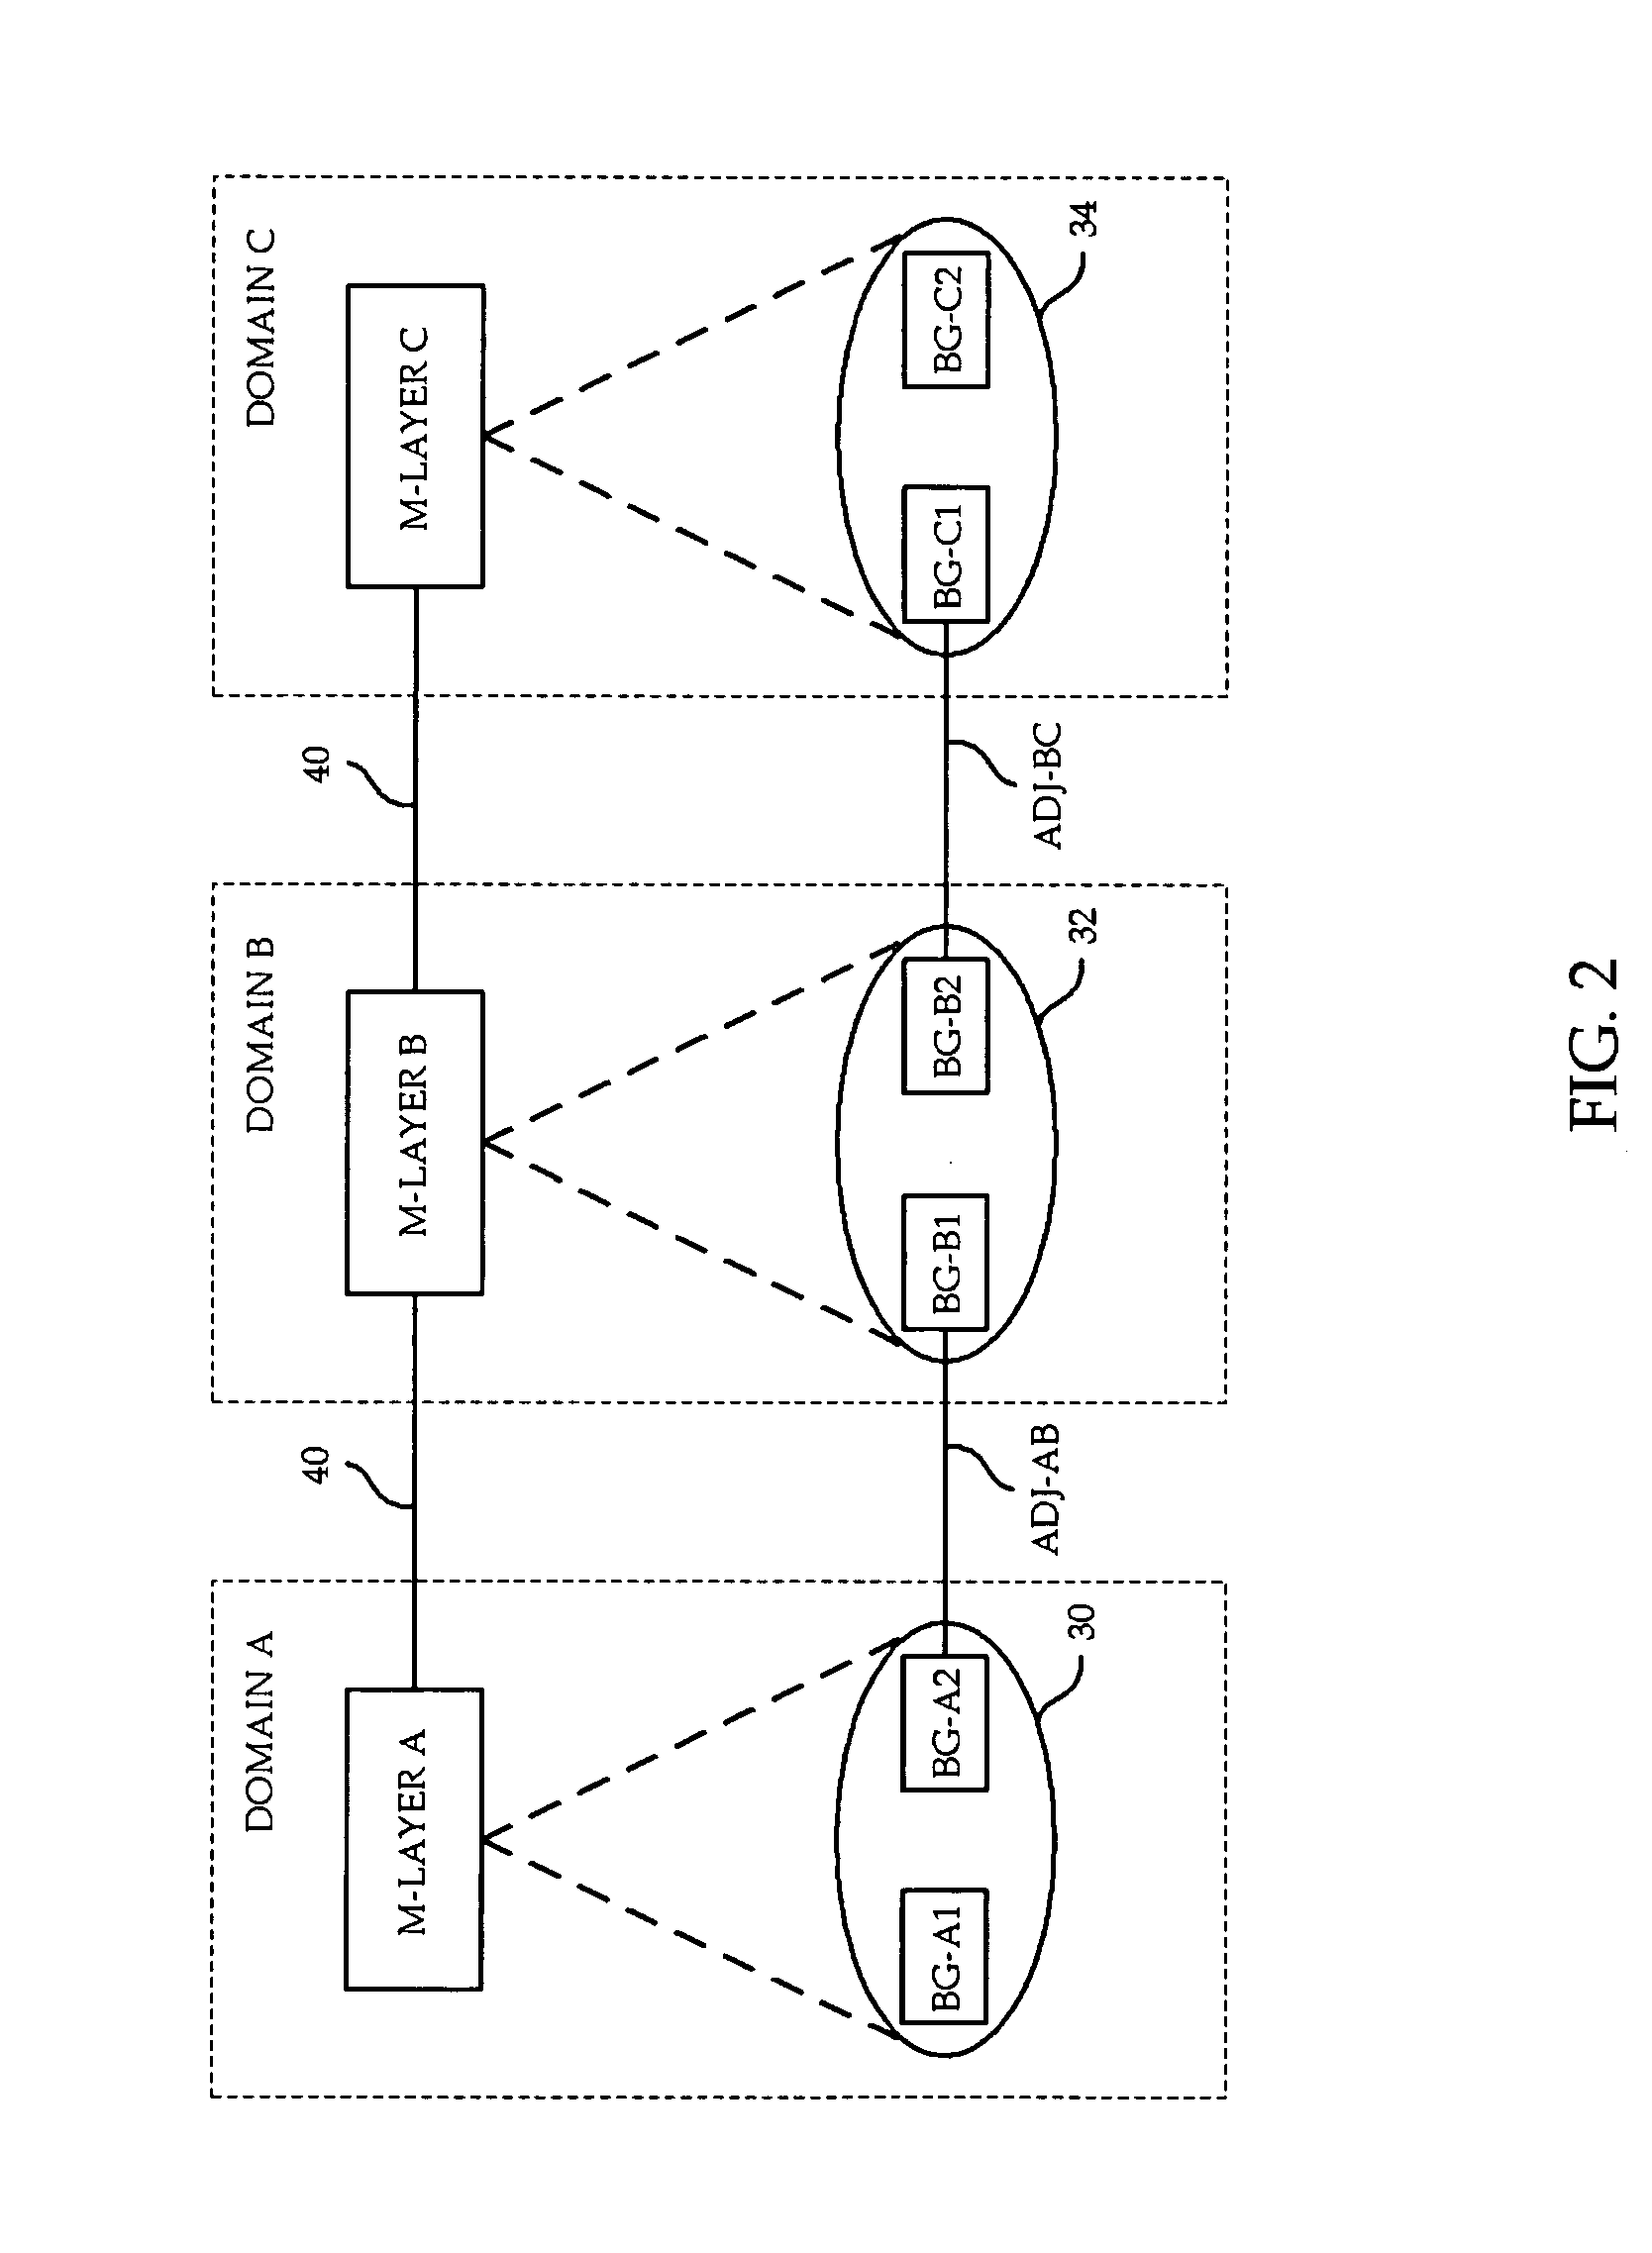 Architecture for configuration and management of cross-domain network services